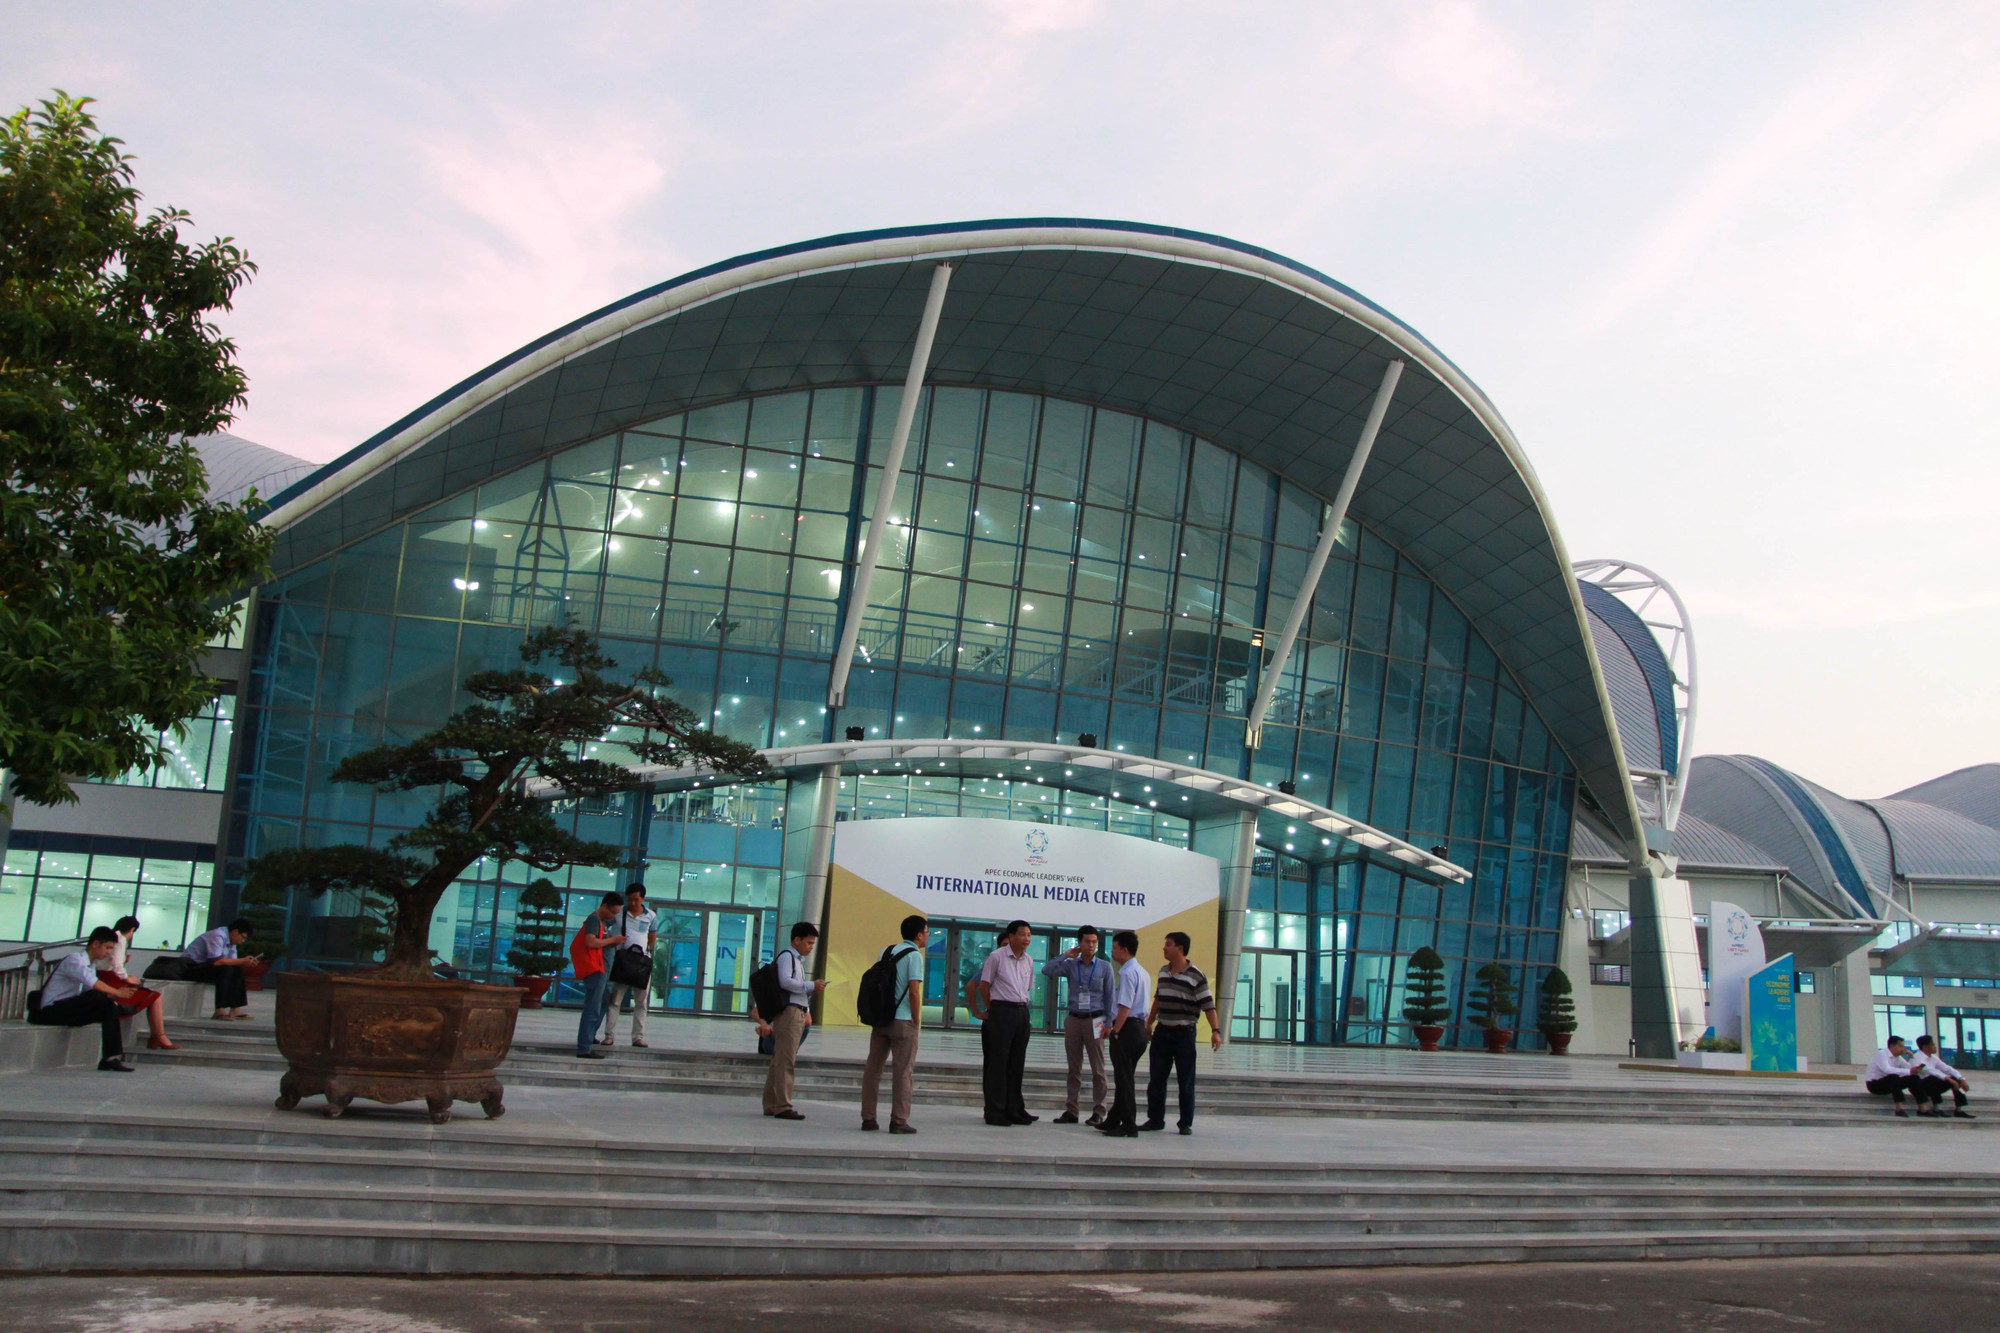 The international media center for this year’s APEC